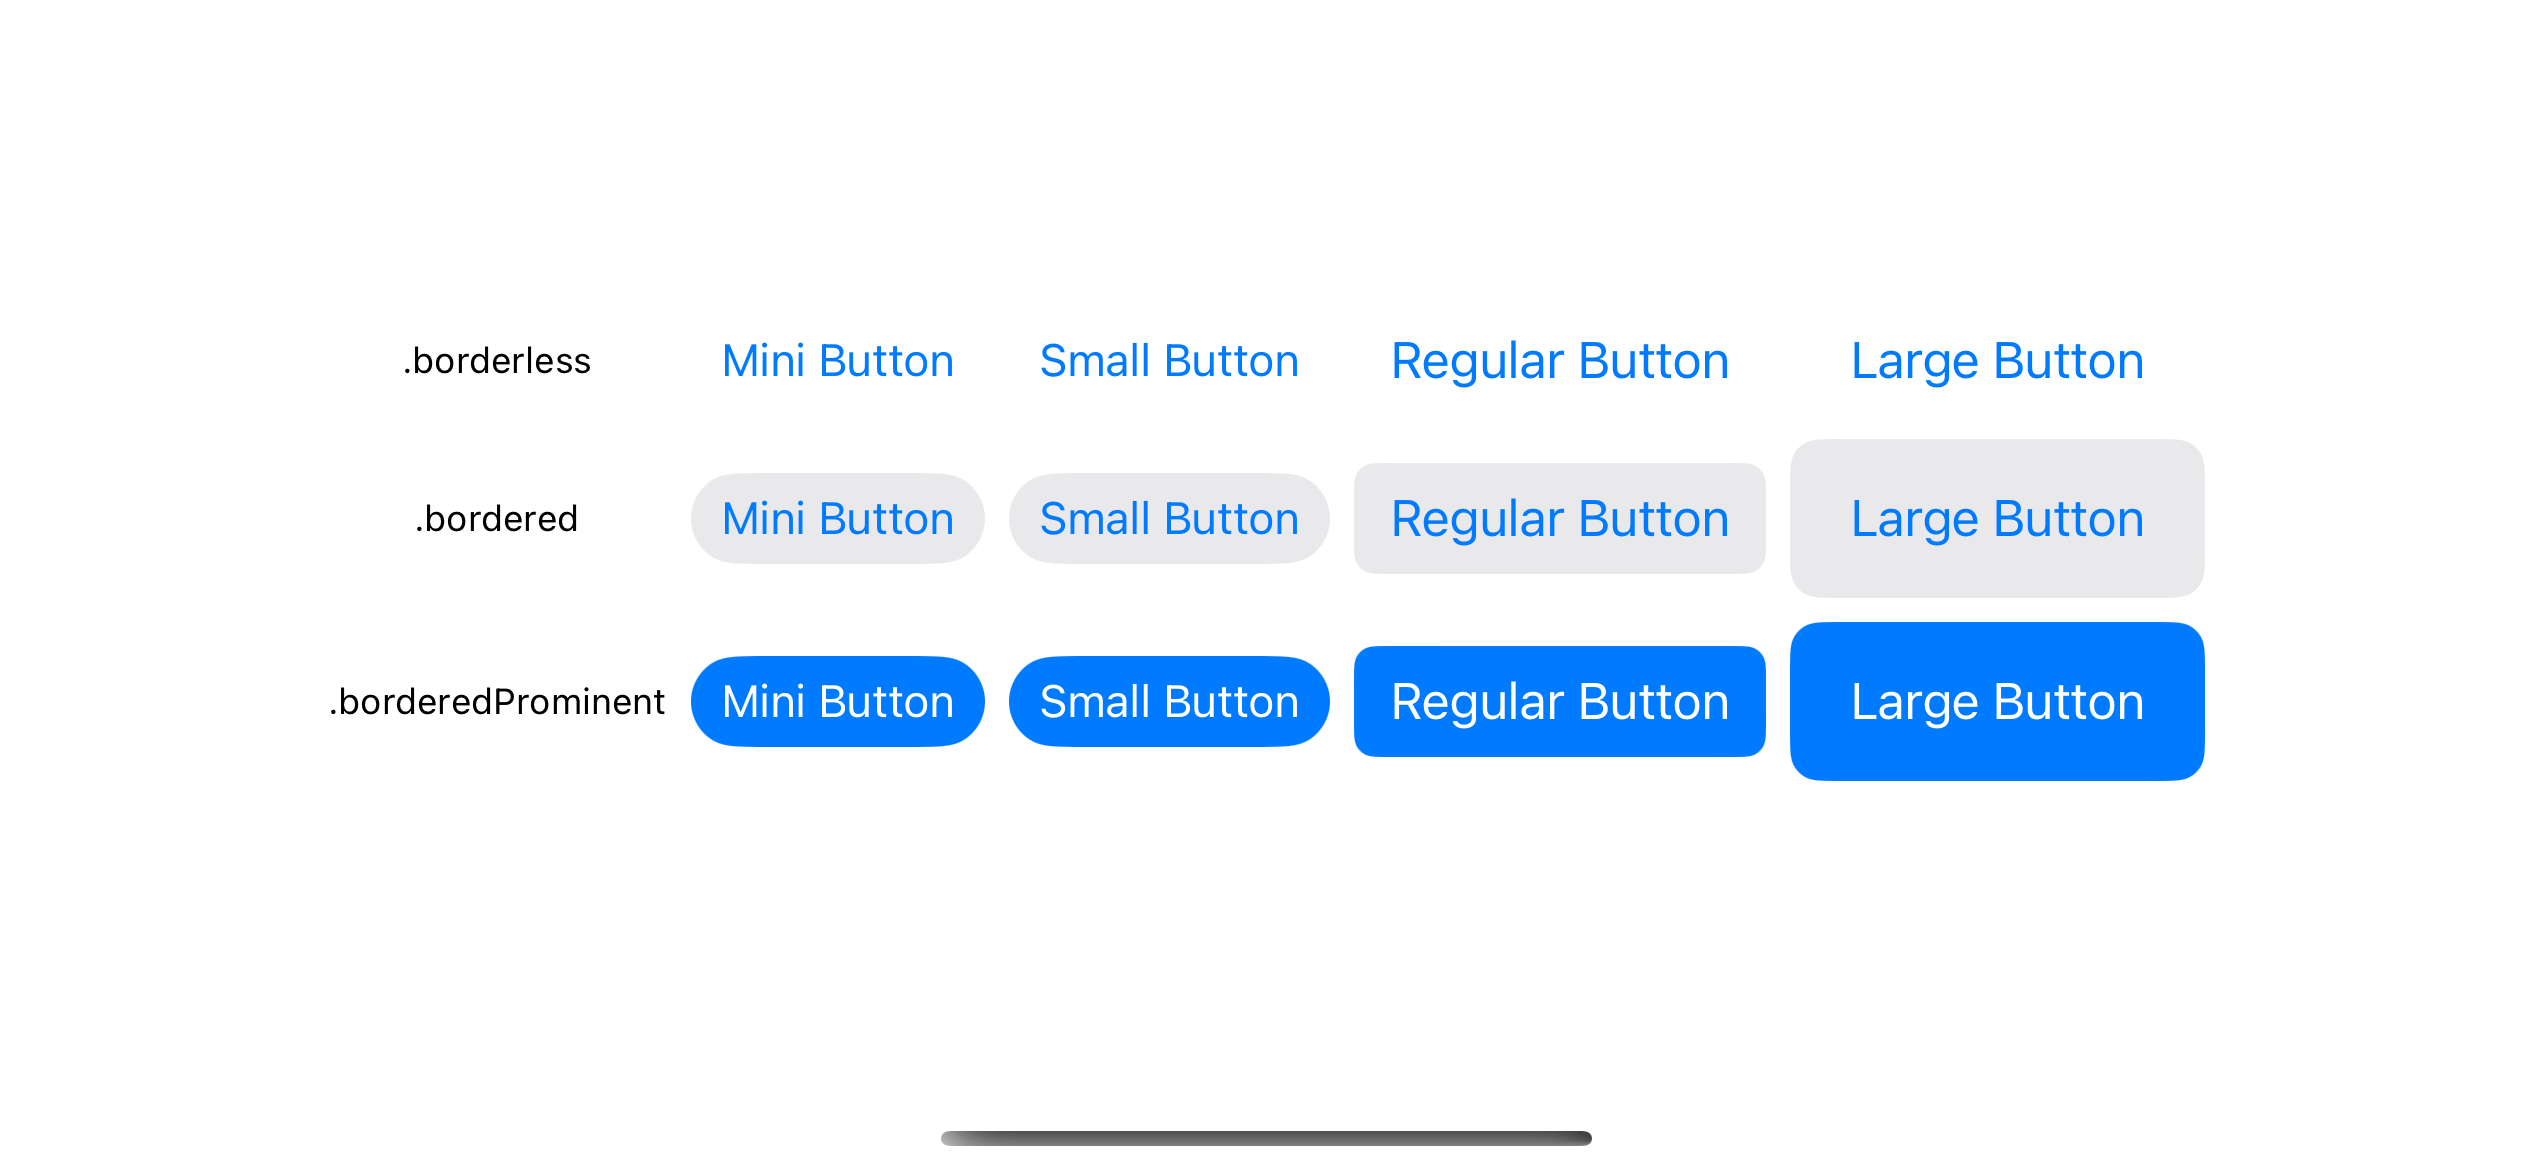 The control size can affect many aspects of a button.